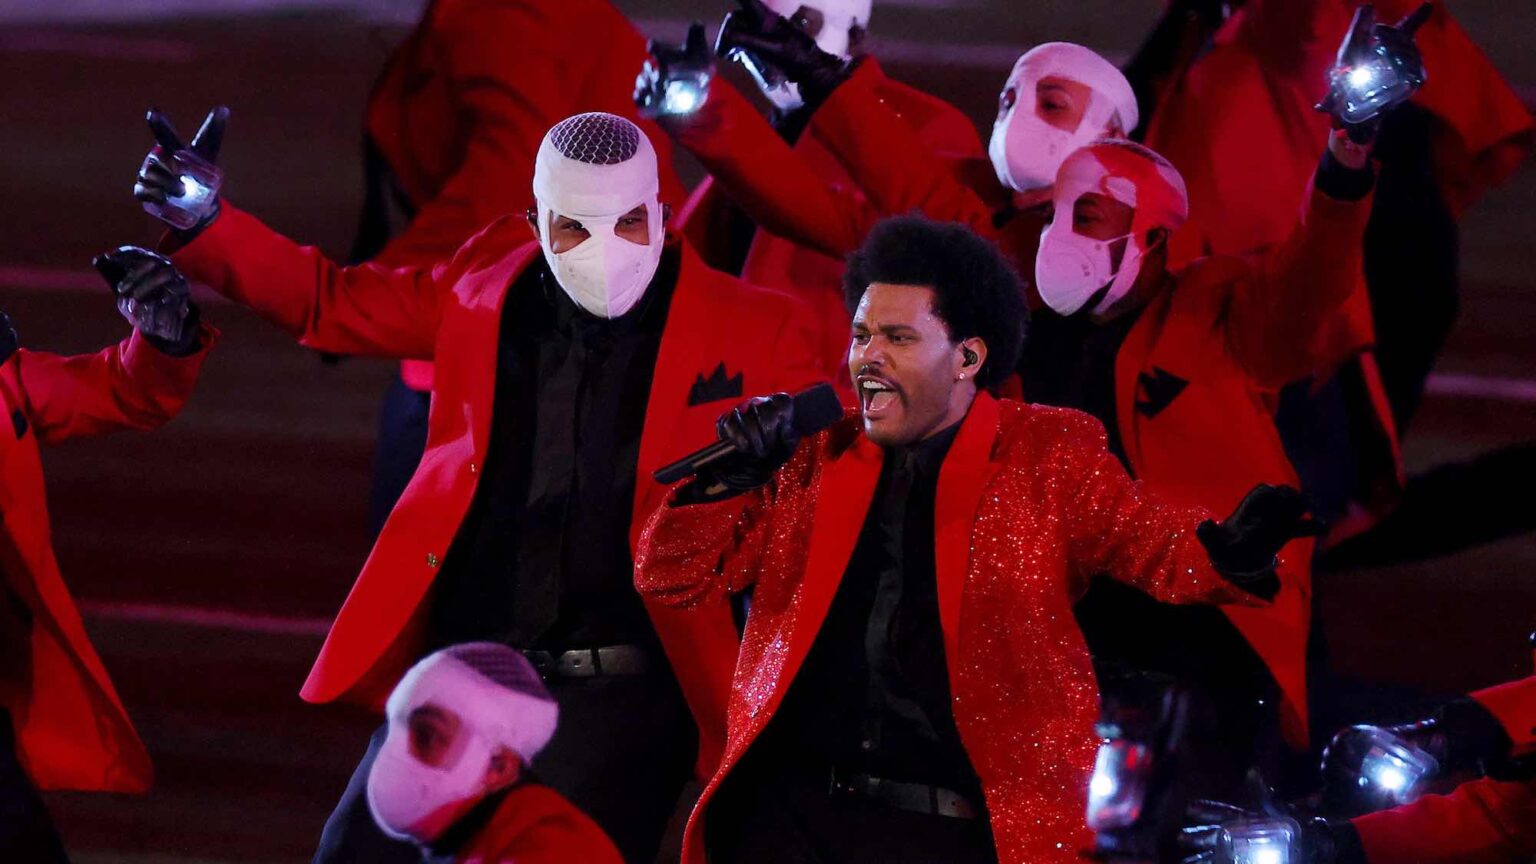 The Internet has some *thoughts* about The Weeknd's Super Bowl performance. Throw shade, spill tea, and laugh at these excellent memes on it.